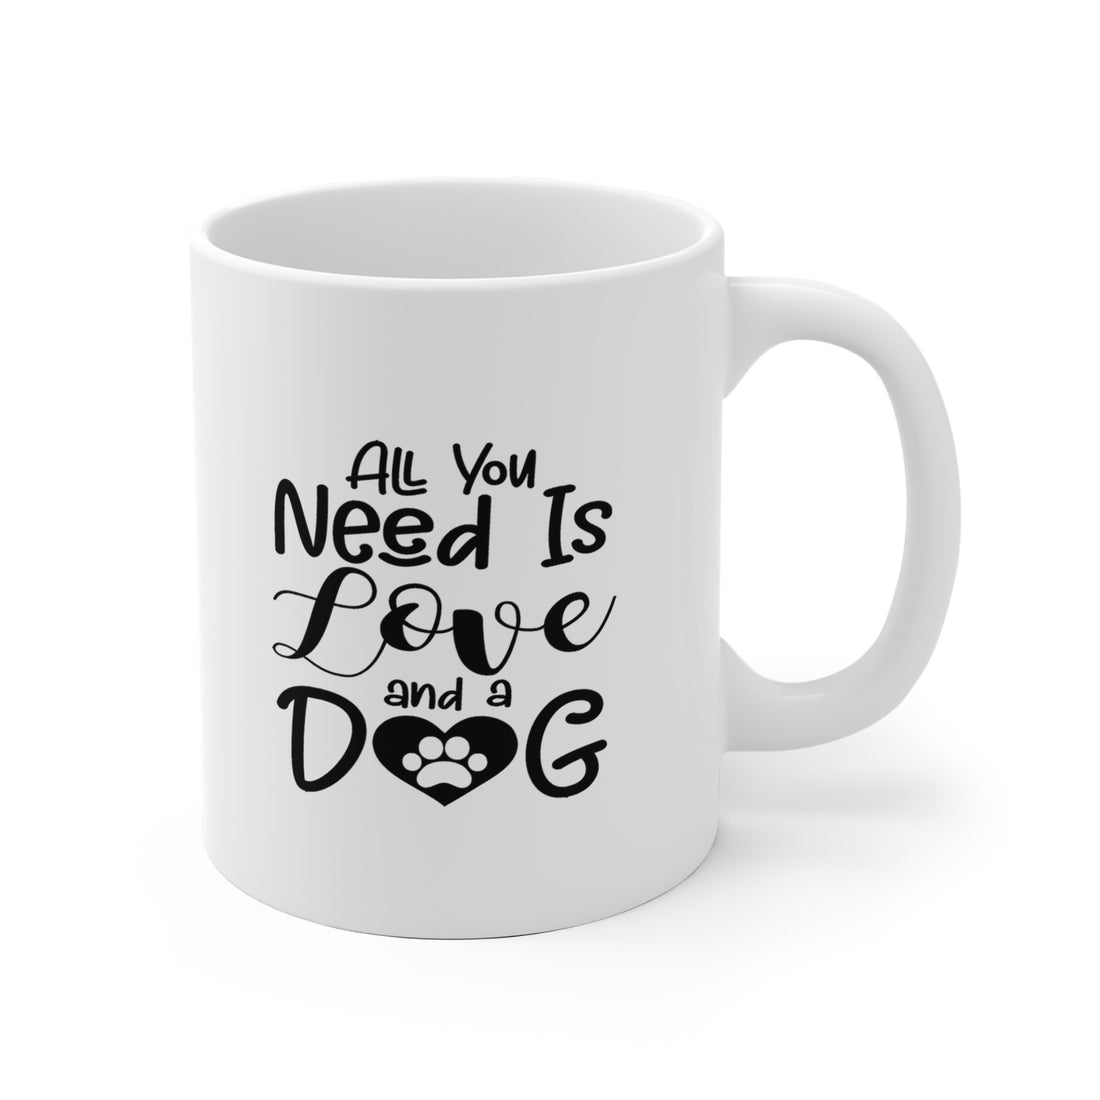 All You Need Is Love &amp; A Dog - White Ceramic Mug 2 sizes Available